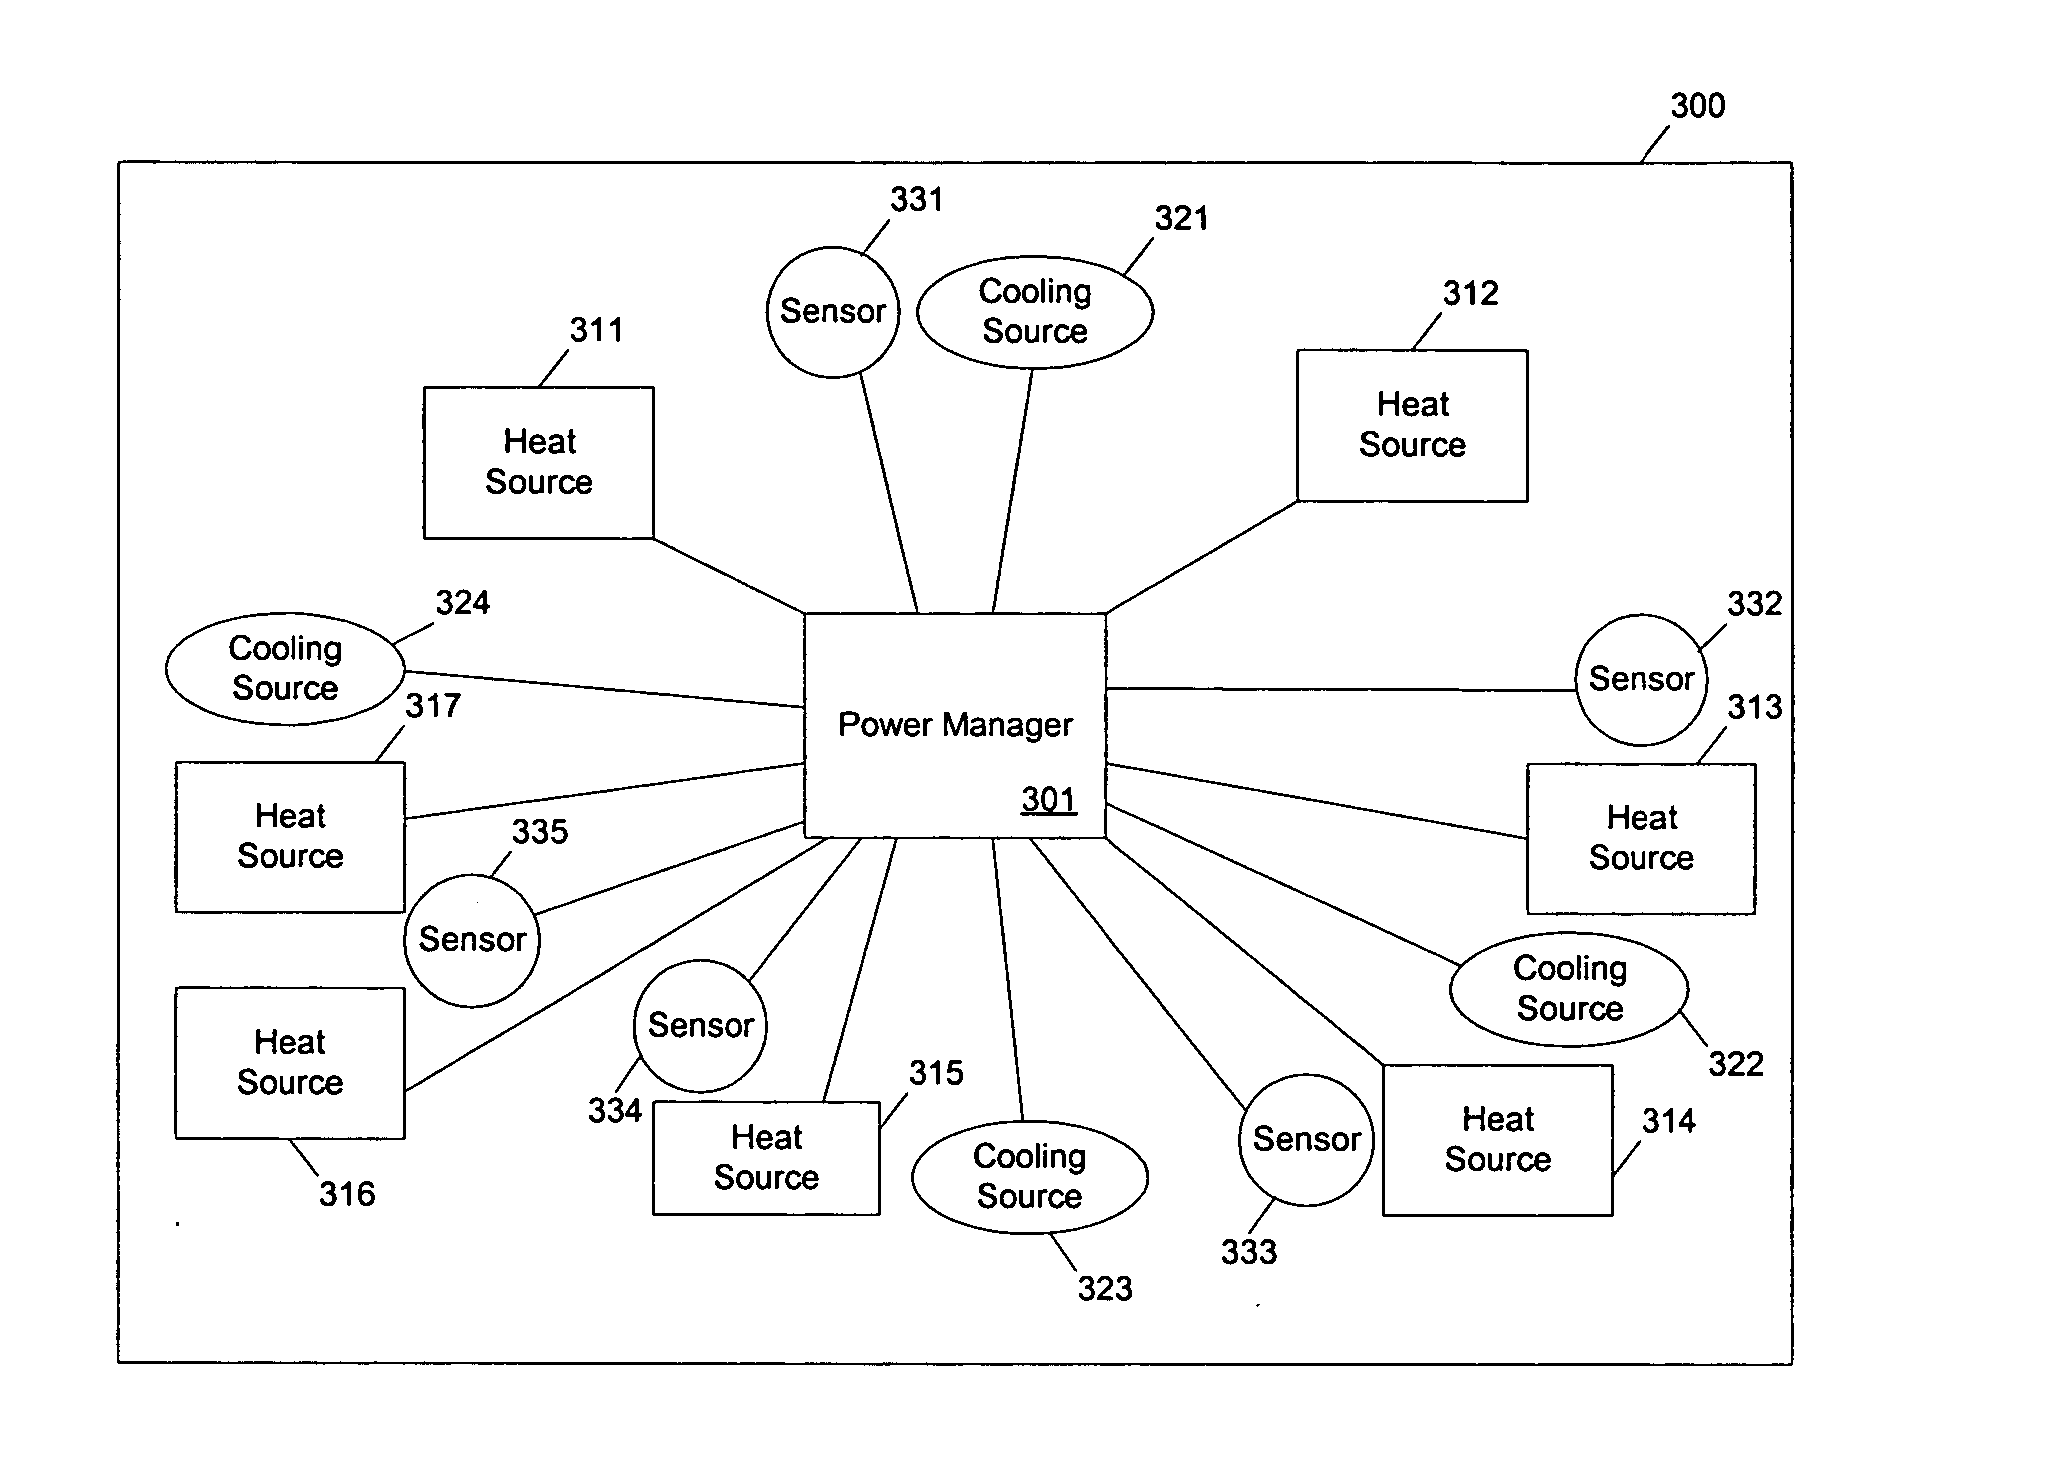 Methods and apparatuses for operating a data processing system